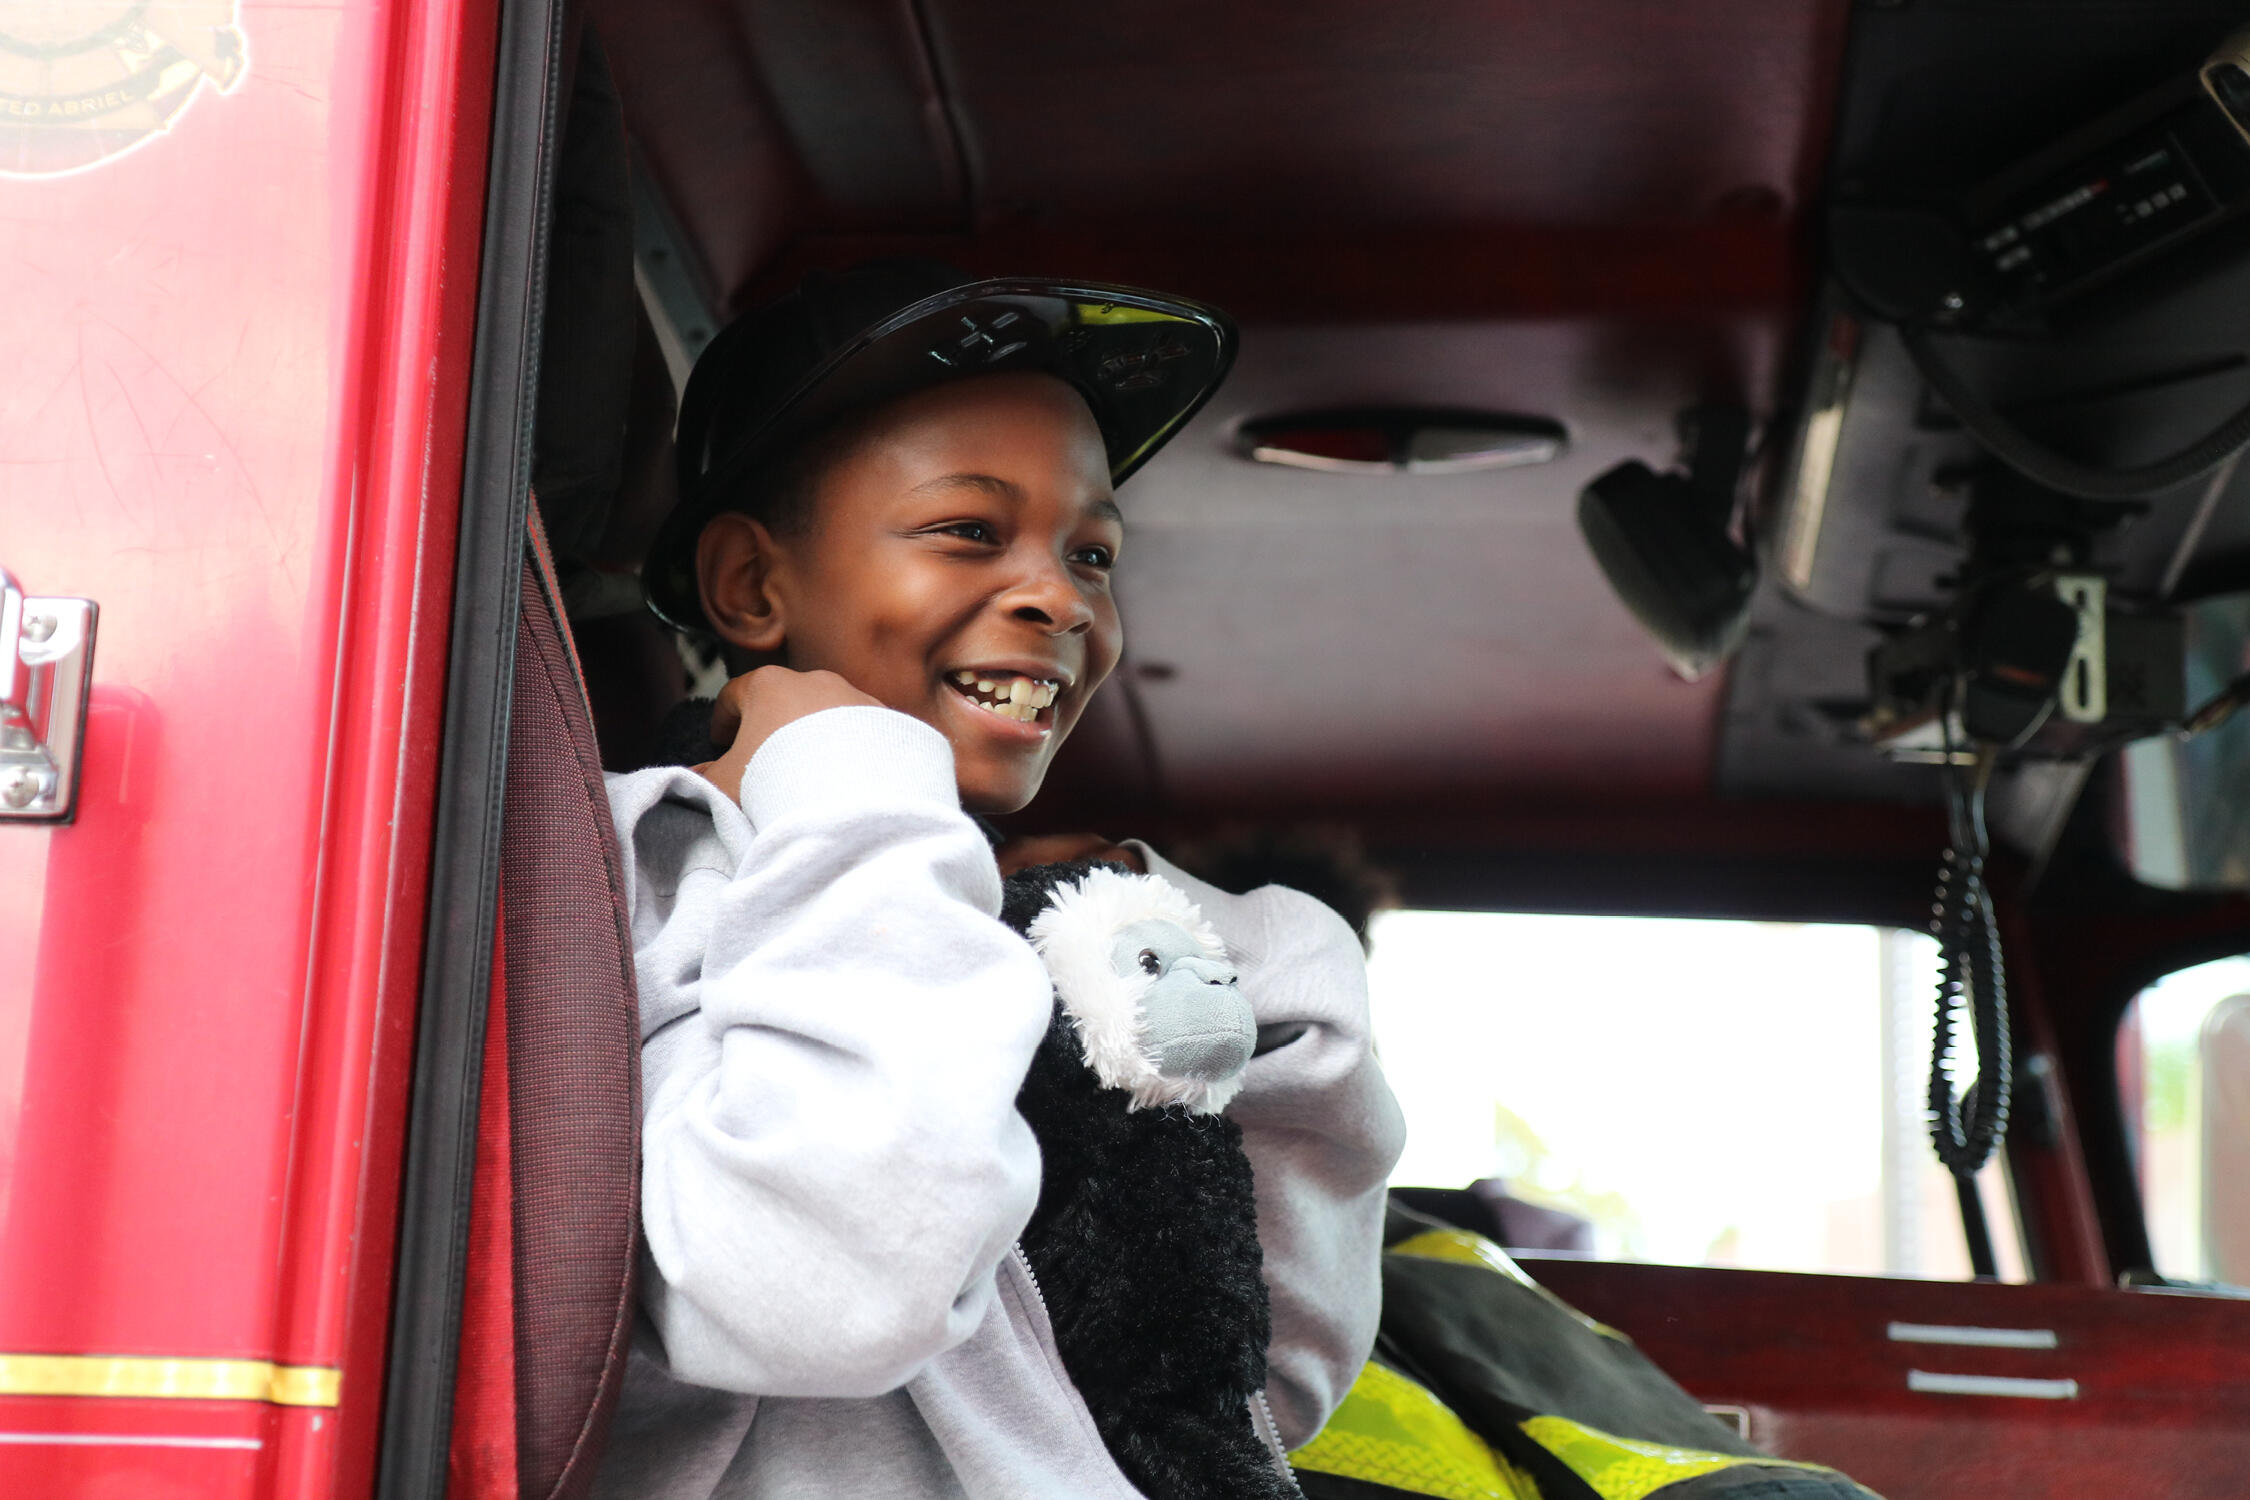 Student smiling while sitting in a firetruck wearing a firefighter's helmet